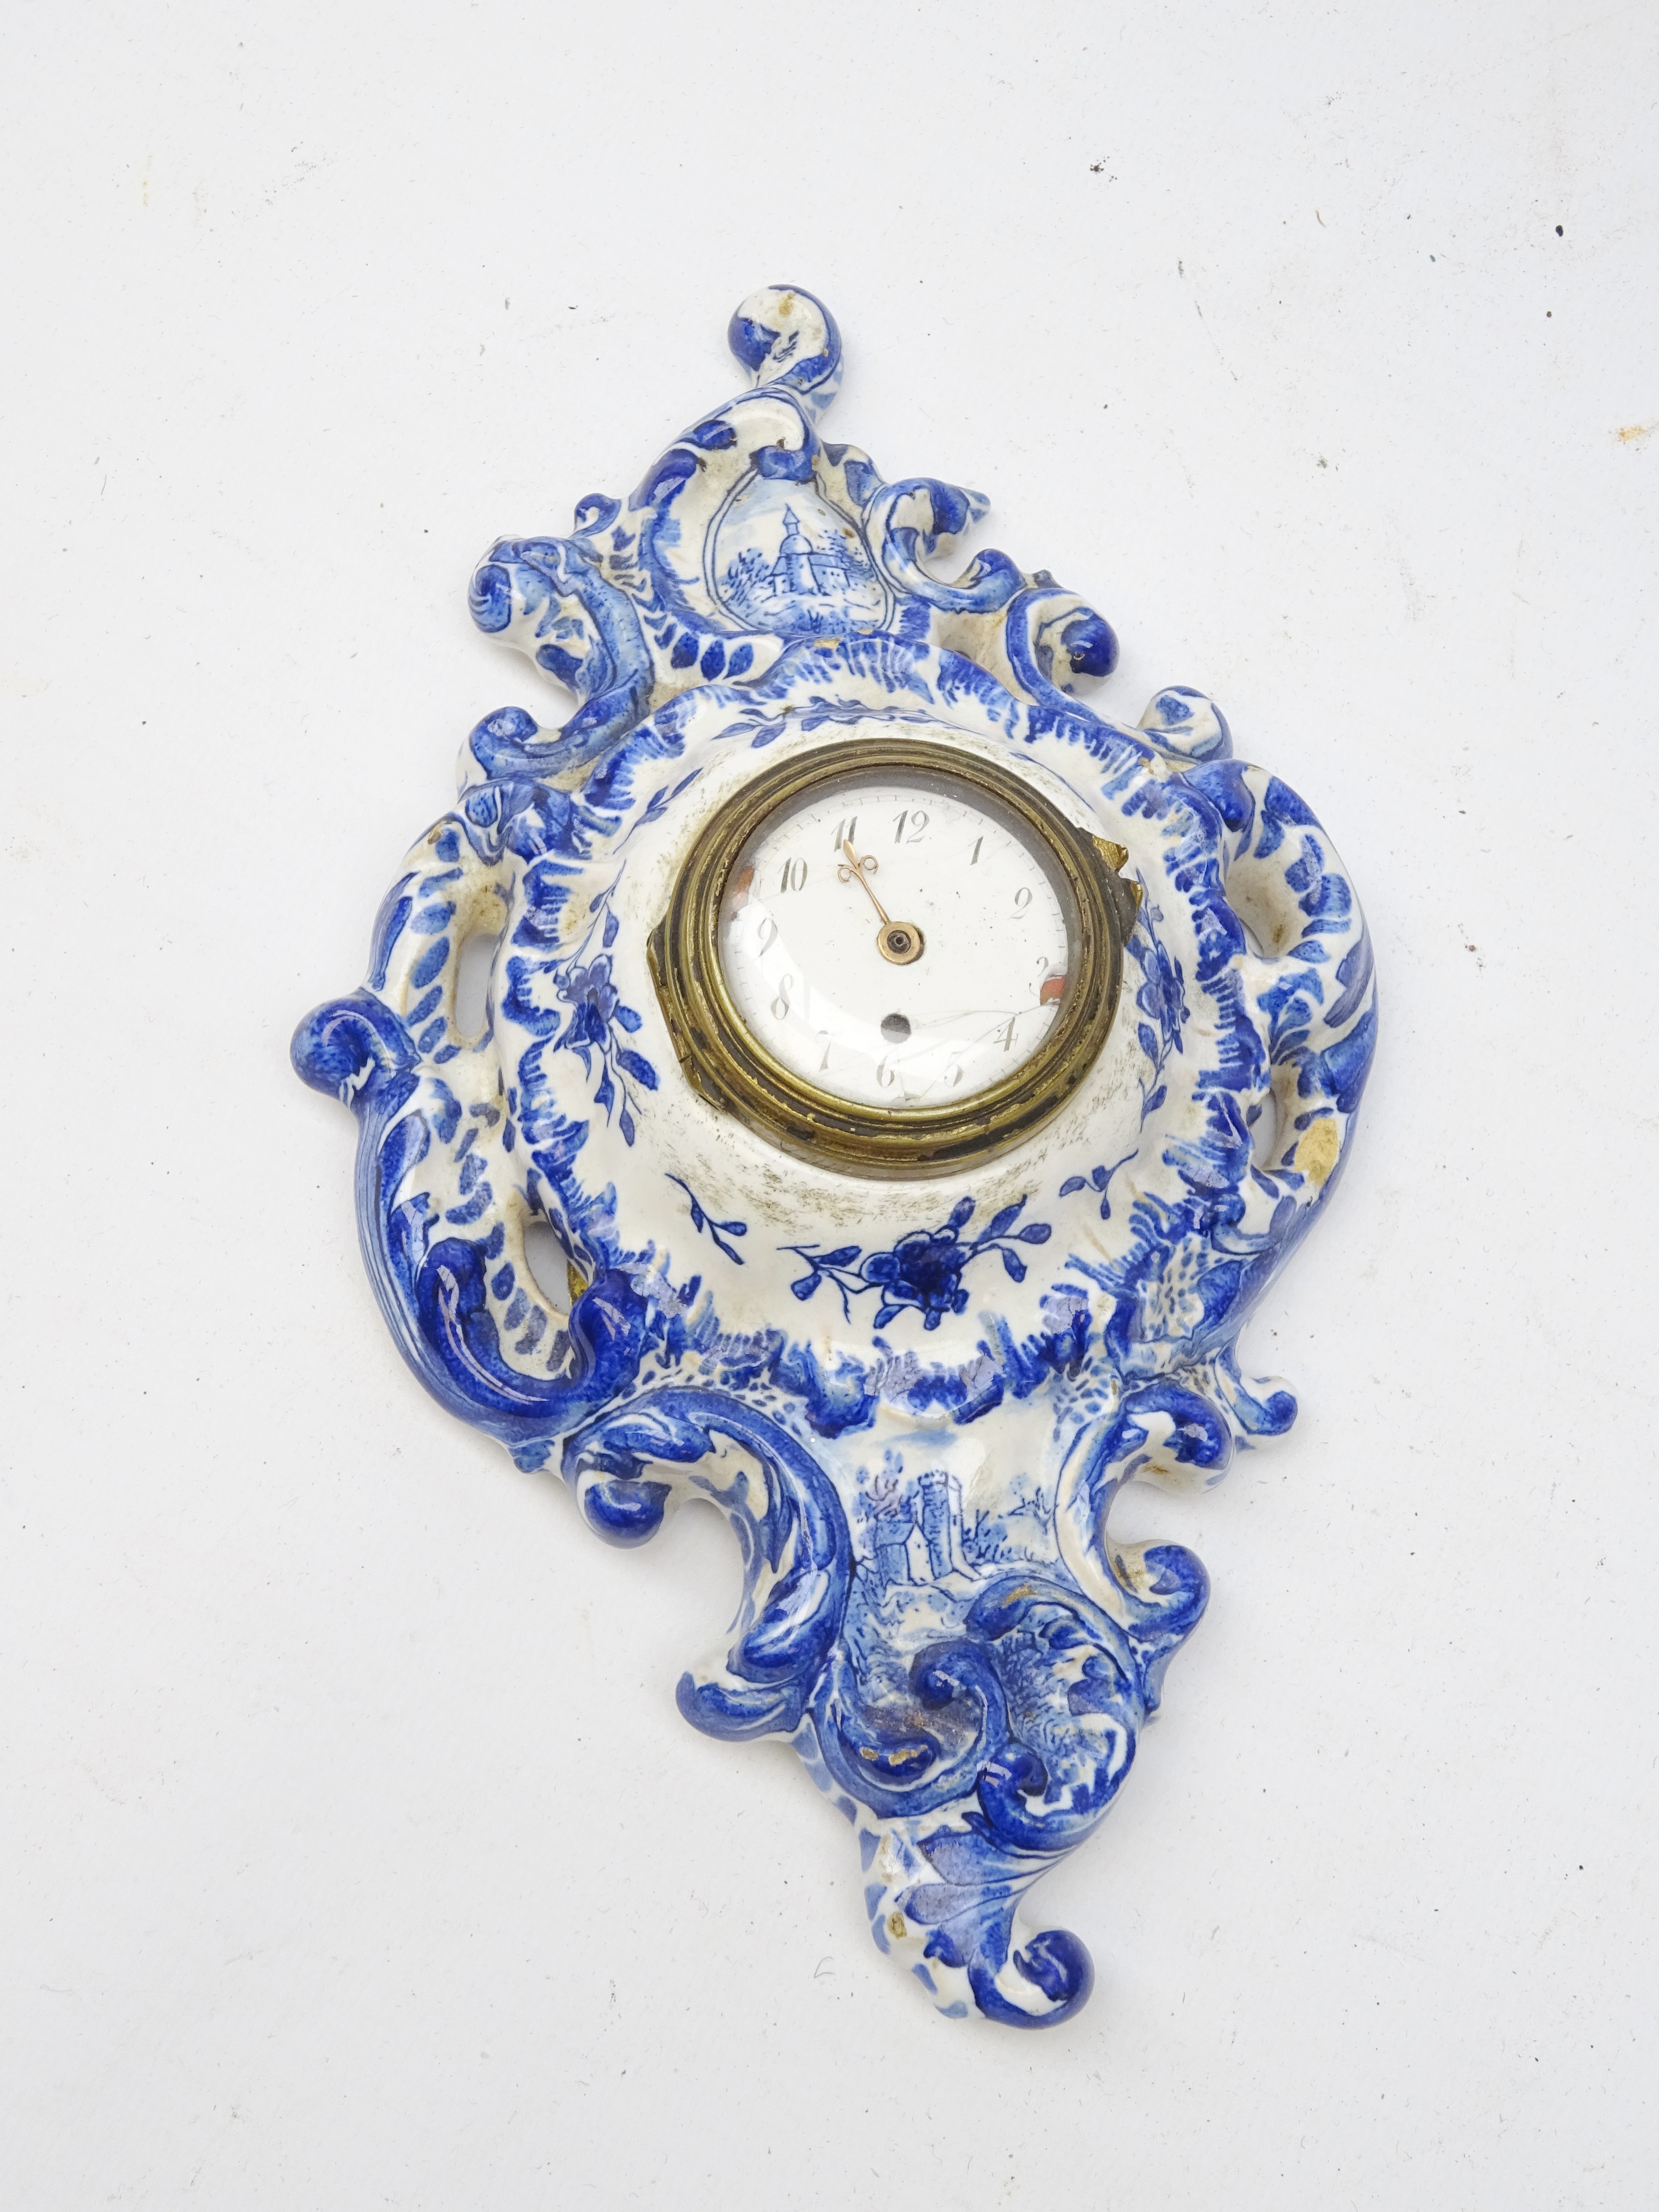 Delft pierced and scrolled cartel clock enclosing an 18th century movement, - Image 2 of 3